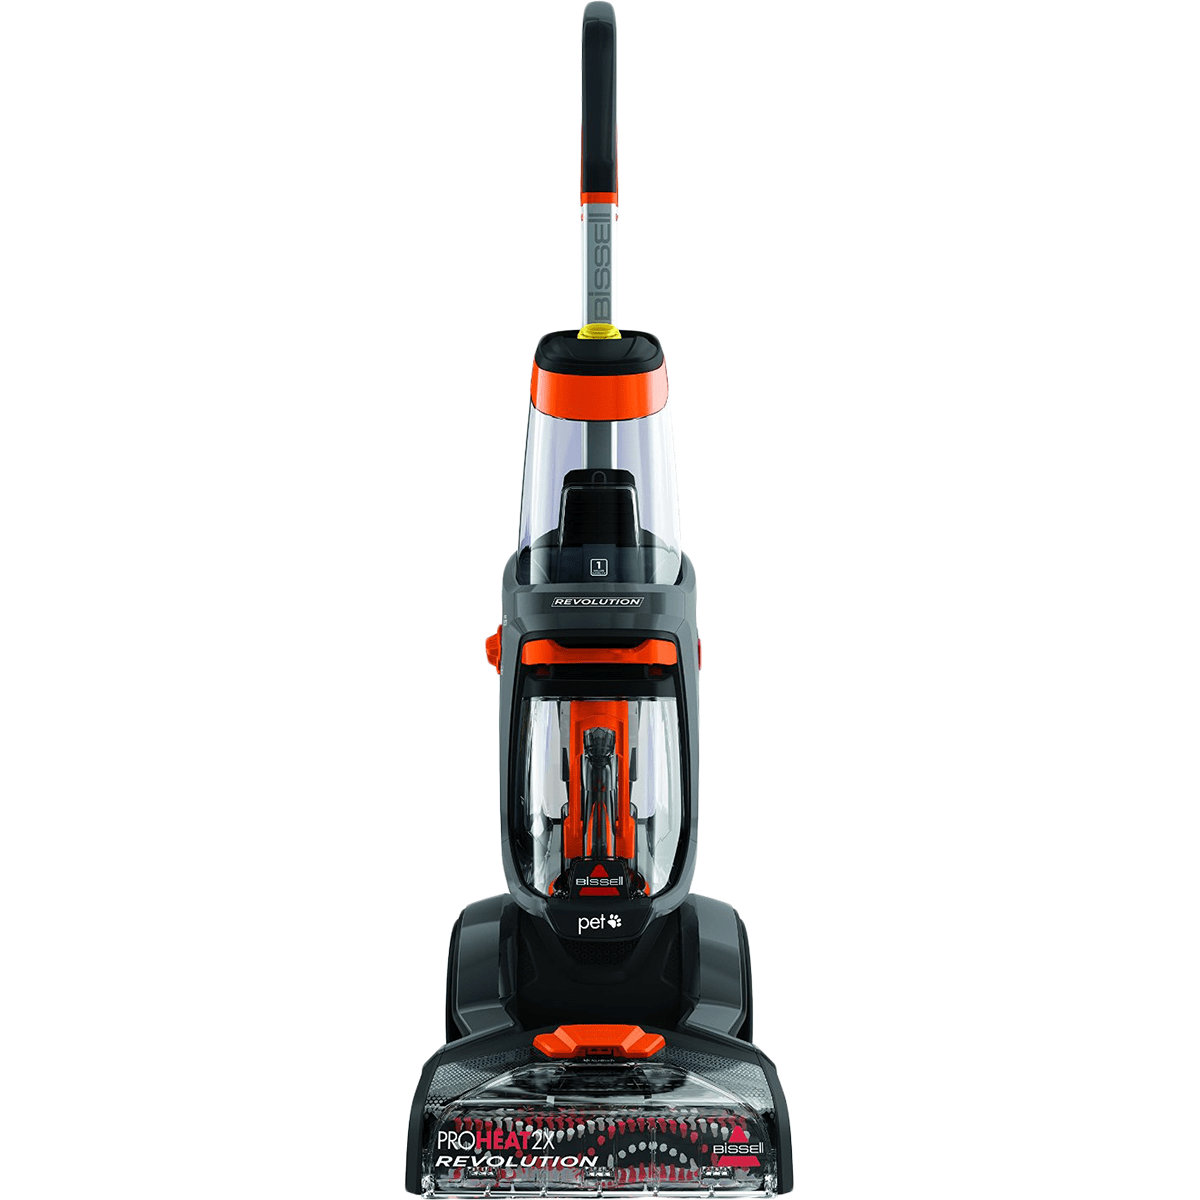 Bissell 1548 Proheat 2x Revolution Pet Upright Carpet Cleaner